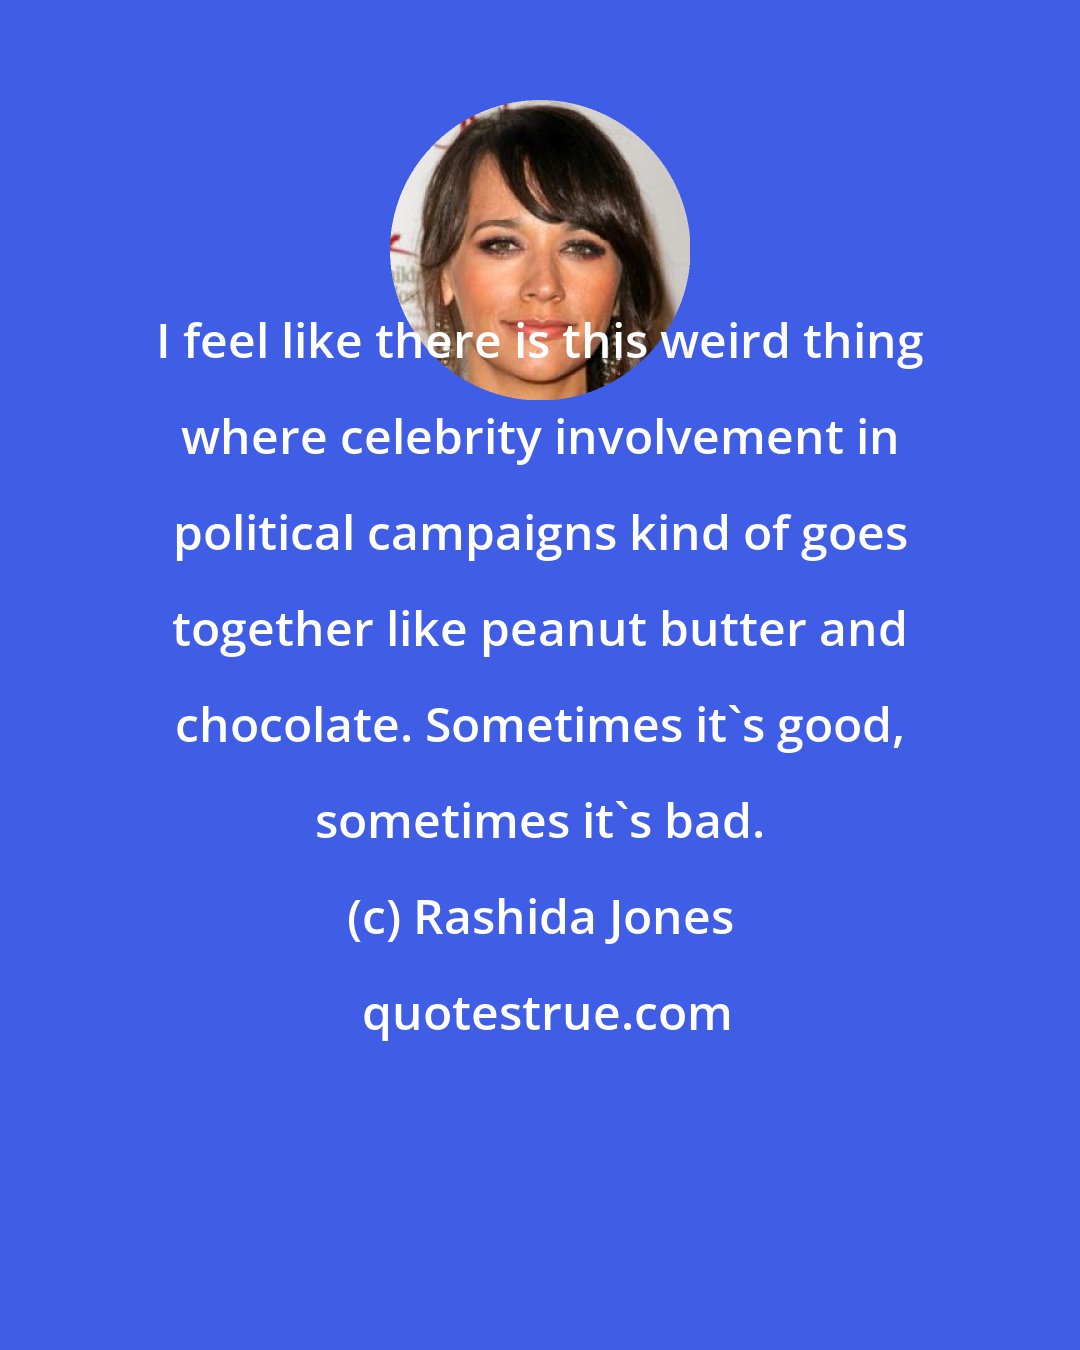 Rashida Jones: I feel like there is this weird thing where celebrity involvement in political campaigns kind of goes together like peanut butter and chocolate. Sometimes it's good, sometimes it's bad.